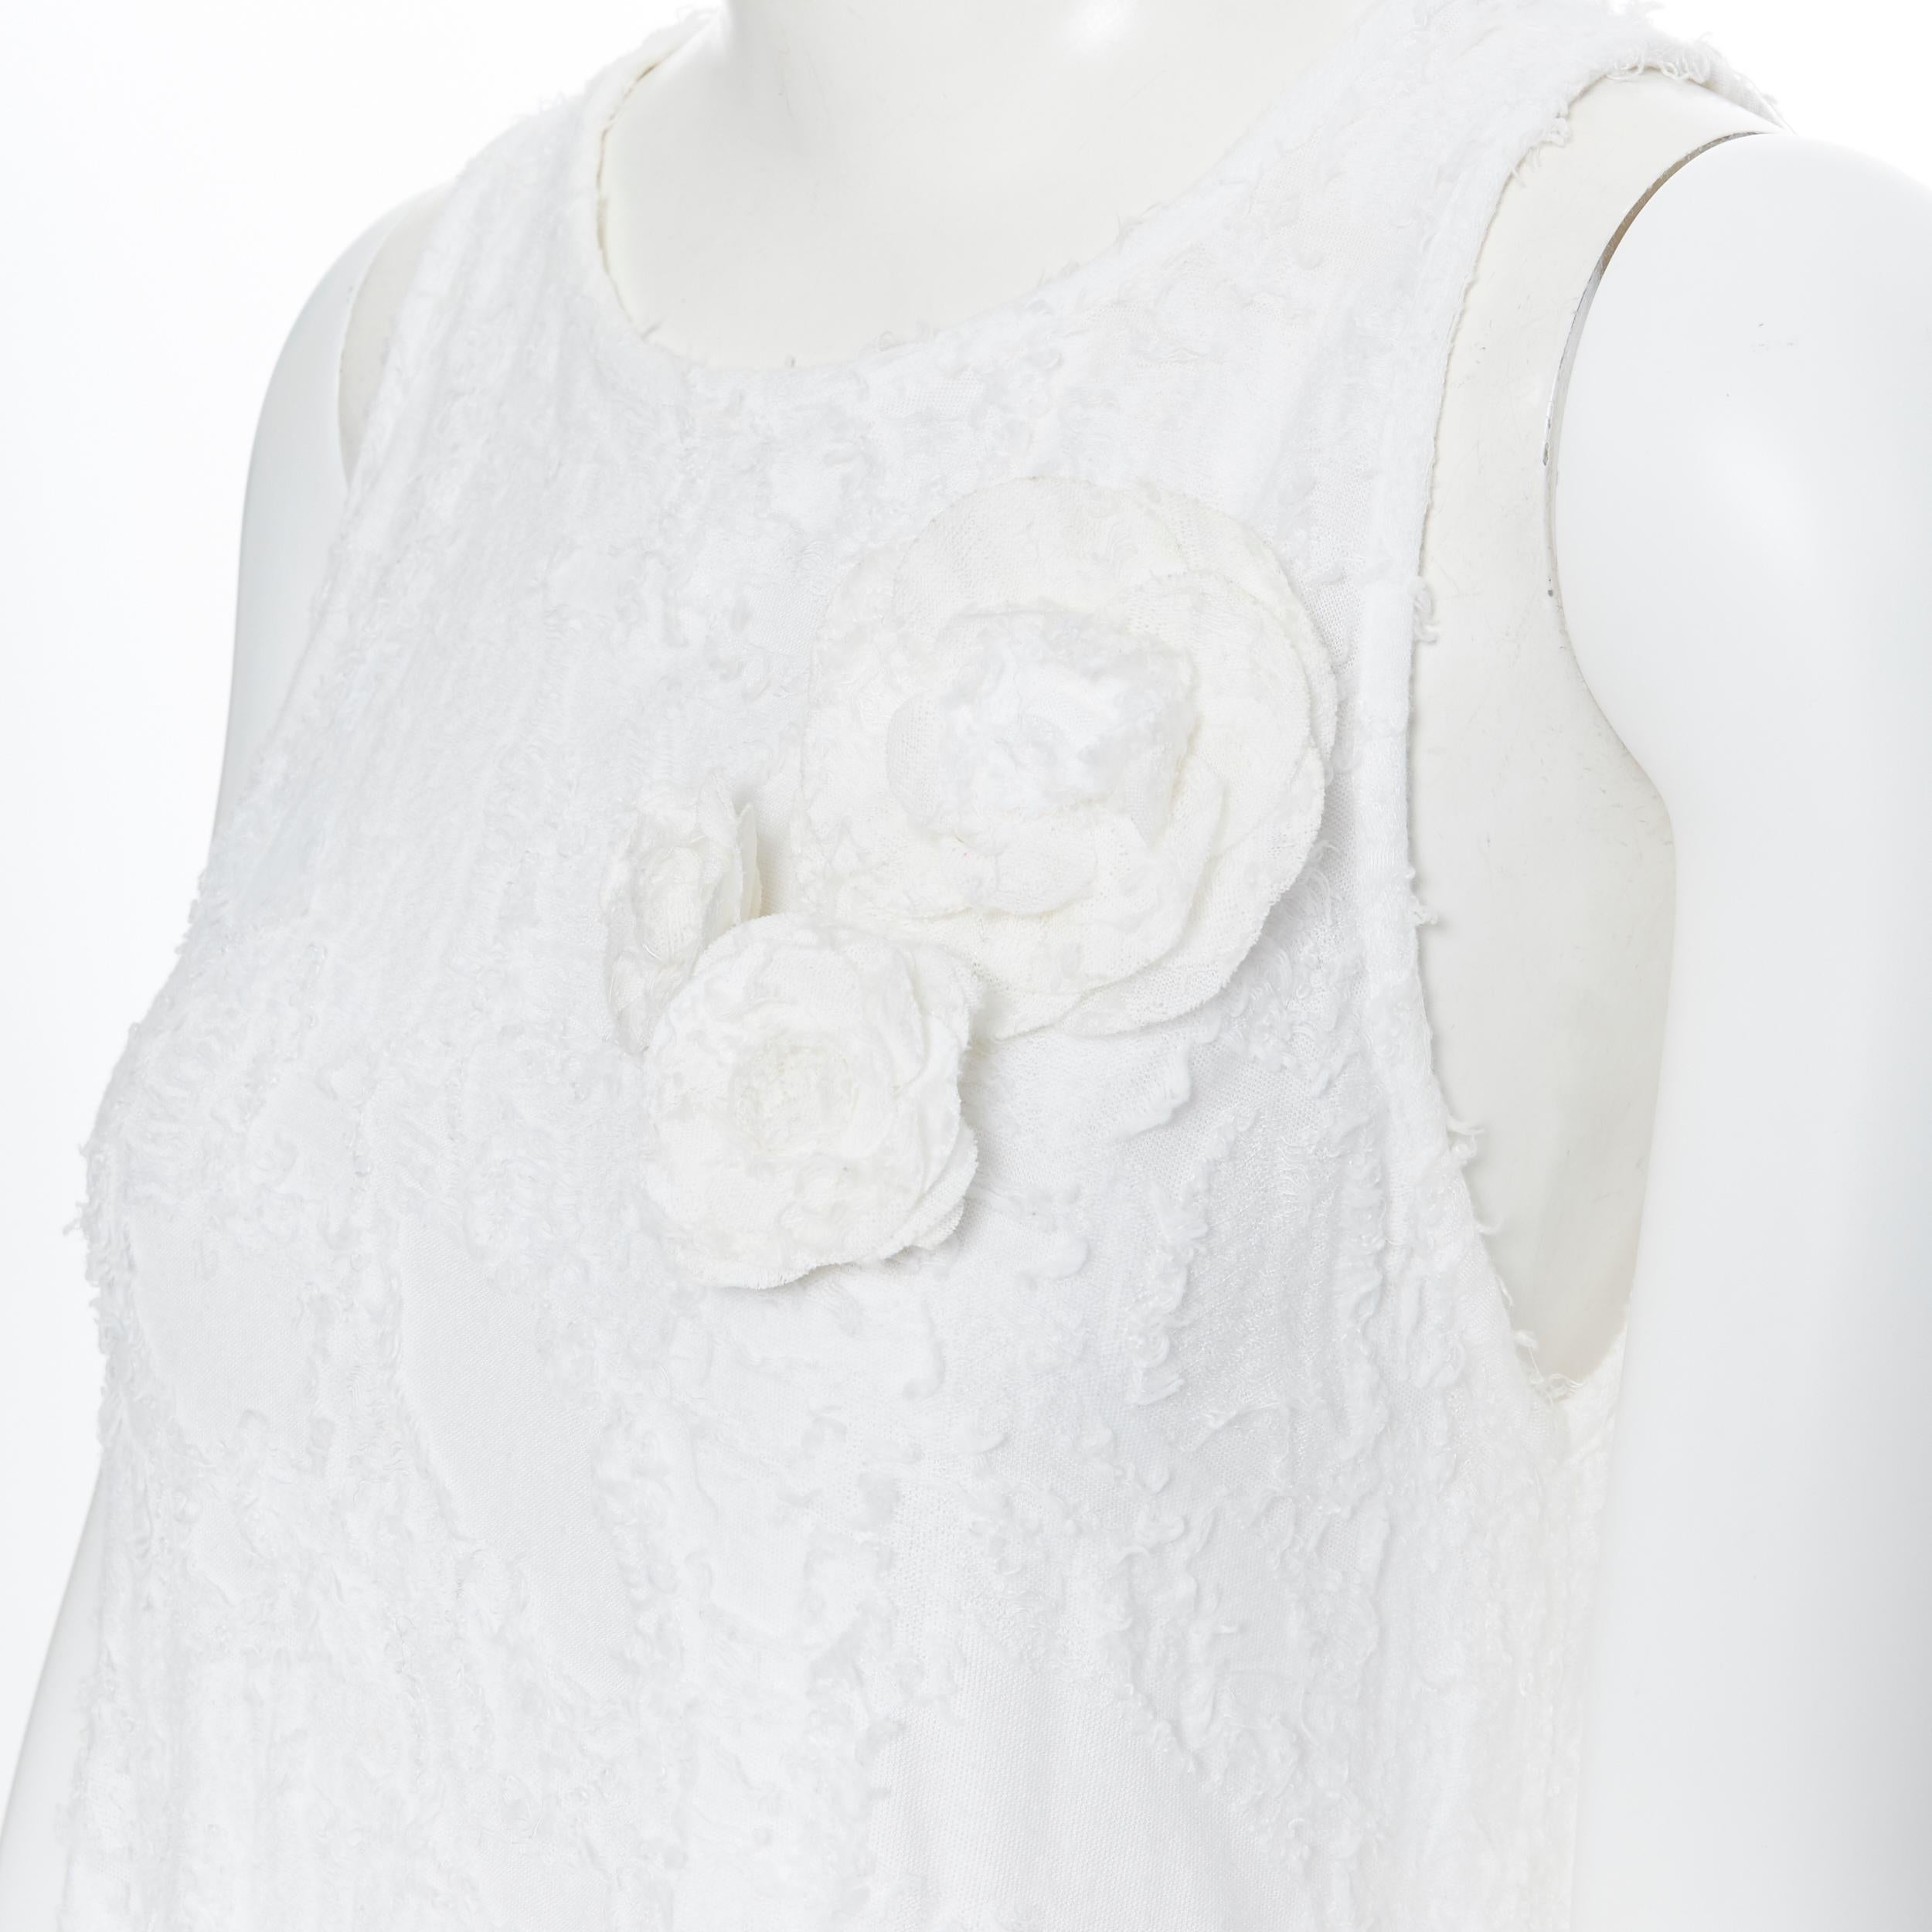 CHANEL white raw frayed cotton trio camellia floral brooch tank top FR36 S 
Brand: Chanel
Designer: Karl Lagerfeld
Model Name / Style: Floral top
Material: Cotton blend
Color: White
Pattern: Solid
Extra Detail: Detachable Camellia floral brooch.